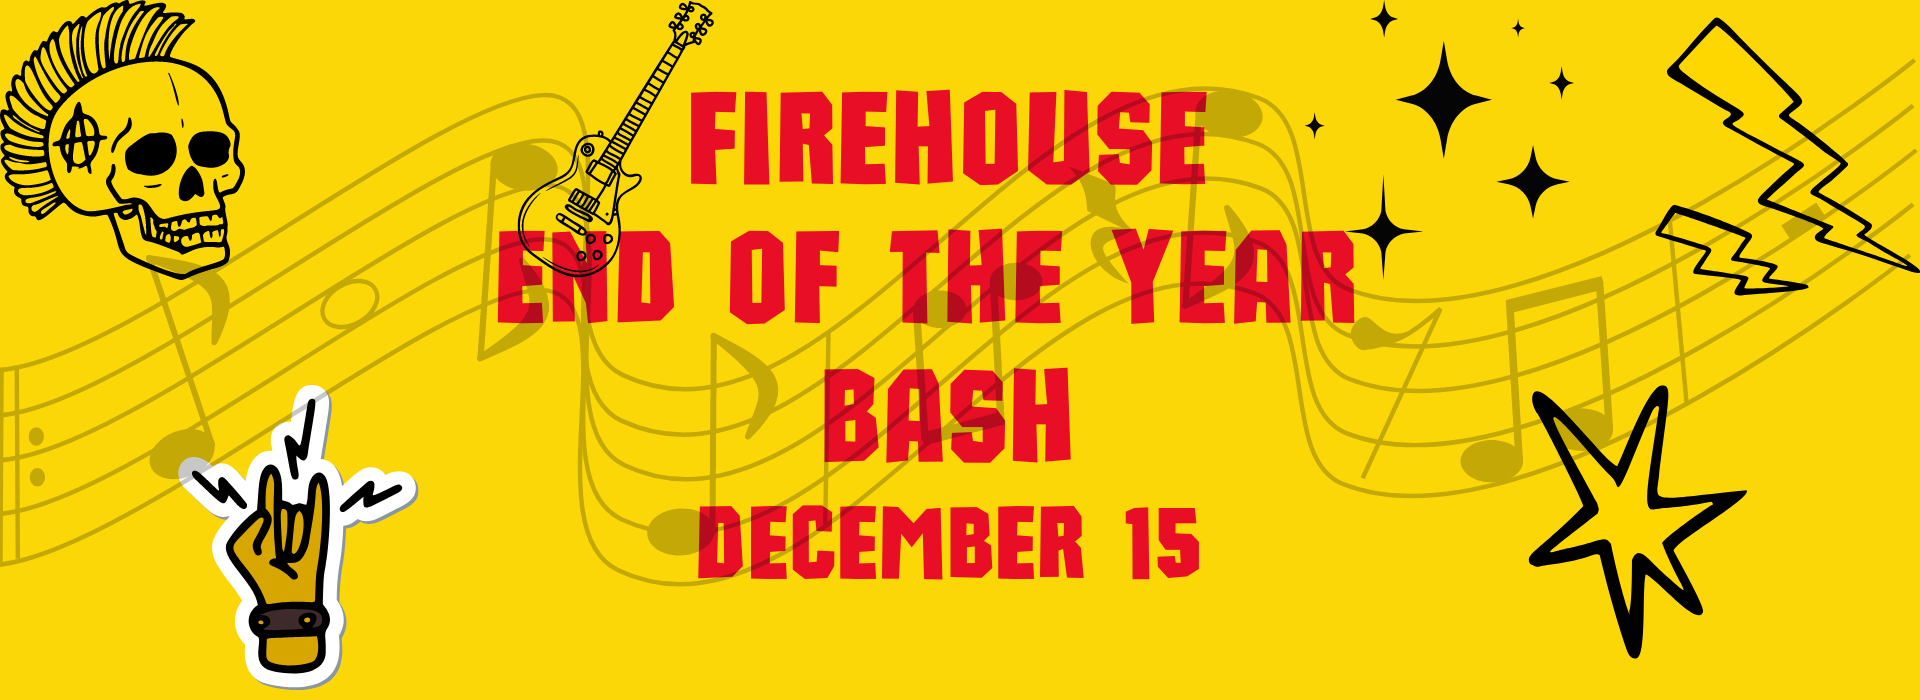 Firehouse End of the Year Bash